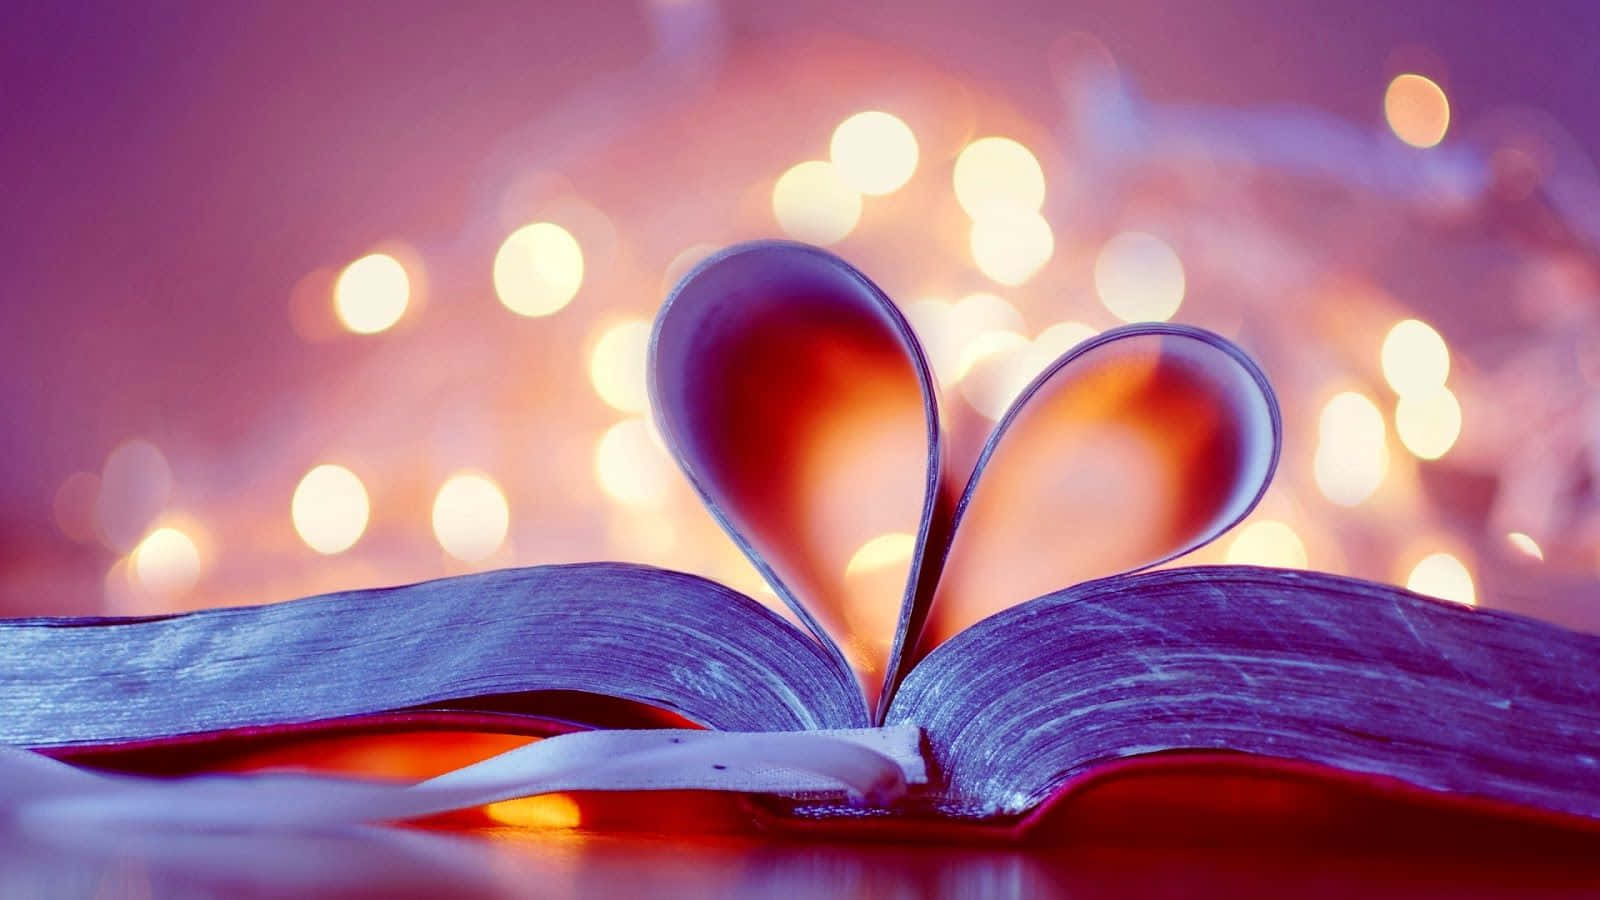 A Book With Hearts On It And Lights Behind It Background